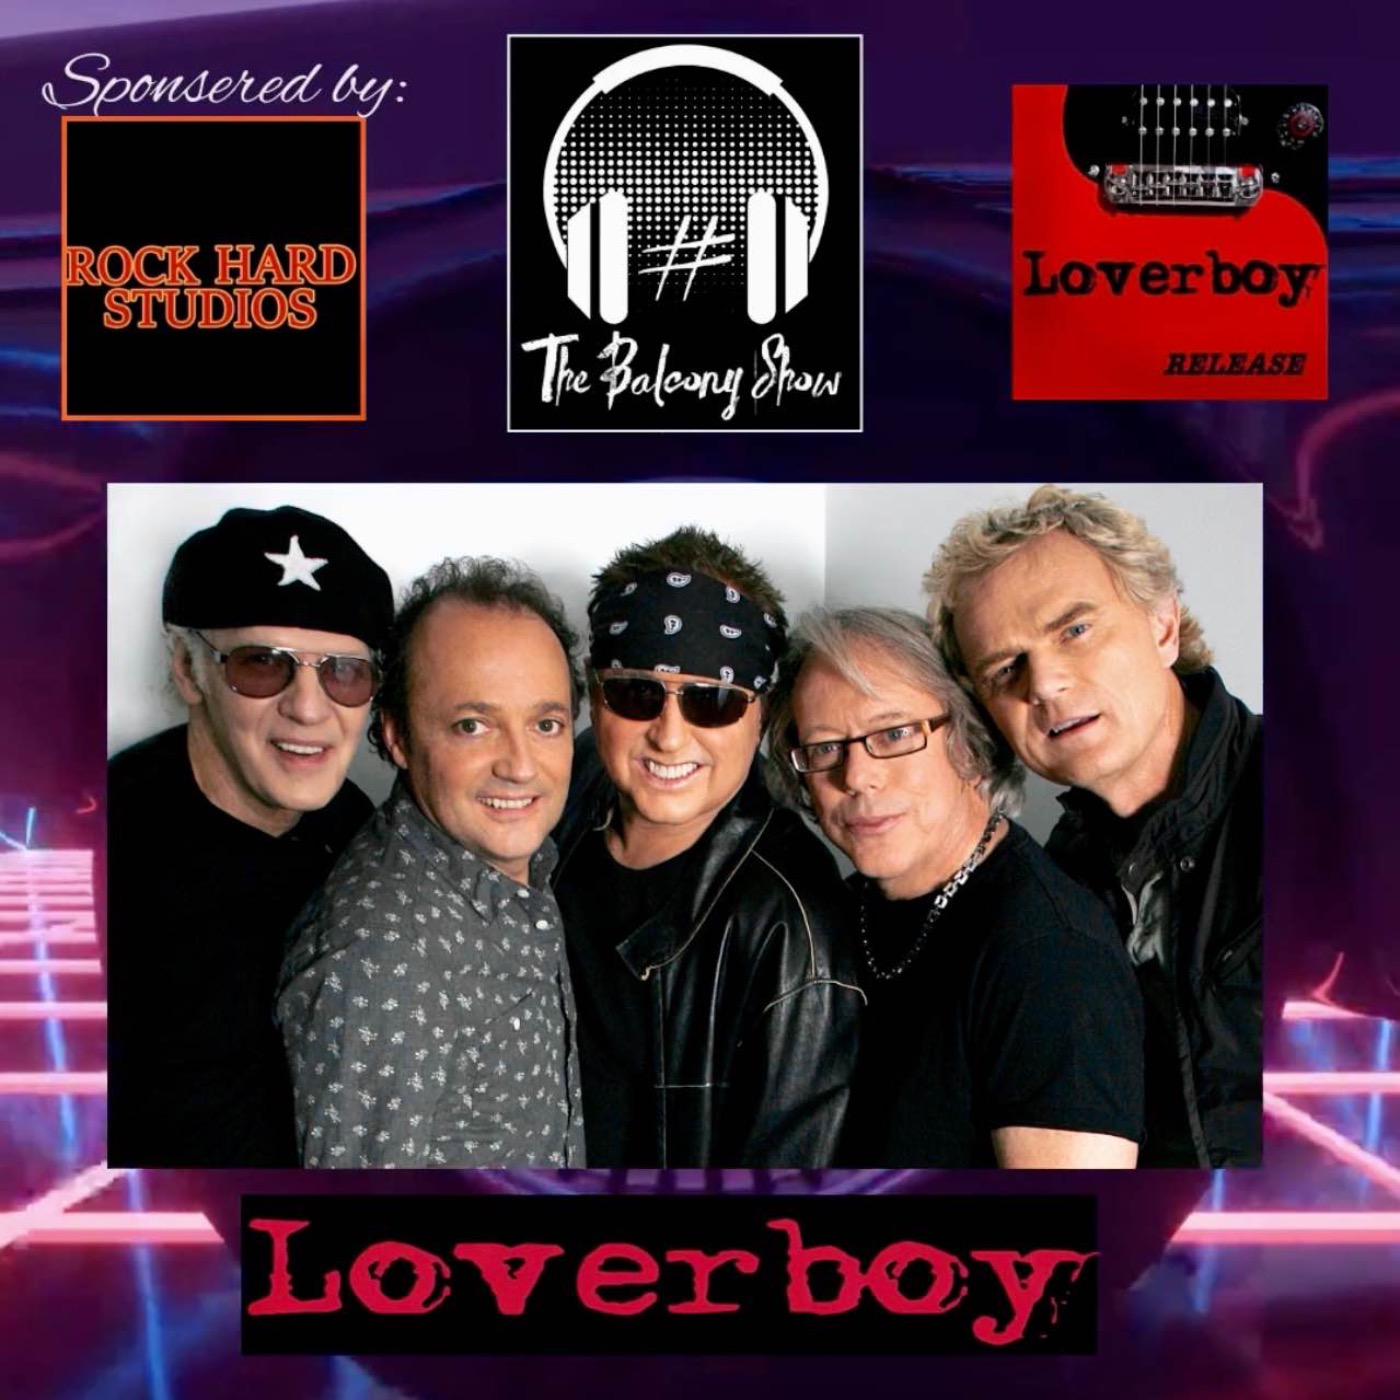 The Balcony Show LoverBoy